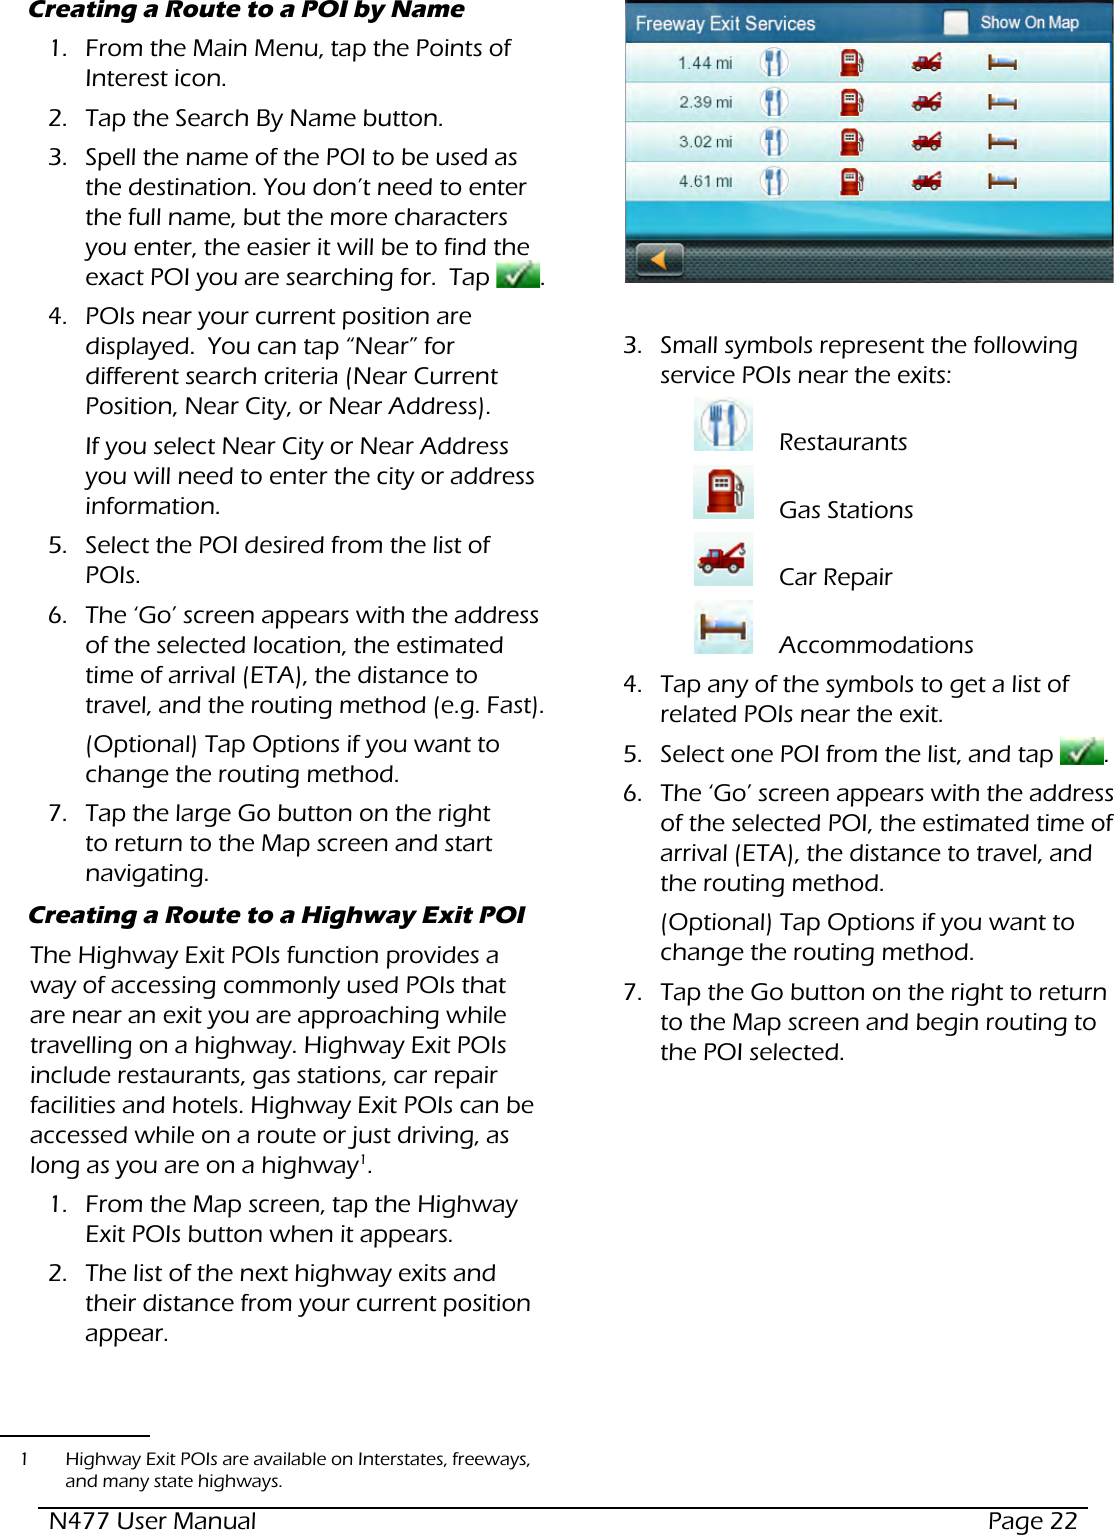 N477 User Manual  Page 22Creating a Route to a POI by Name1.  From the Main Menu, tap the Points of Interest icon.  2.  Tap the Search By Name button.3.  Spell the name of the POI to be used as the destination. You don’t need to enter the full name, but the more characters you enter, the easier it will be to find the exact POI you are searching for.  Tap  .4.  POIs near your current position are displayed.  You can tap “Near” for different search criteria (Near Current Position, Near City, or Near Address).If you select Near City or Near Address you will need to enter the city or address information.5.  Select the POI desired from the list of POIs.6.  The ‘Go’ screen appears with the address of the selected location, the estimated time of arrival (ETA), the distance to travel, and the routing method (e.g. Fast).(Optional) Tap Options if you want to change the routing method.7.  Tap the large Go button on the right to return to the Map screen and start navigating.Creating a Route to a Highway Exit POIThe Highway Exit POIs function provides a way of accessing commonly used POIs that are near an exit you are approaching while travelling on a highway. Highway Exit POIs include restaurants, gas stations, car repair facilities and hotels. Highway Exit POIs can be accessed while on a route or just driving, as long as you are on a highway1.1.  From the Map screen, tap the Highway Exit POIs button when it appears.  2.  The list of the next highway exits and their distance from your current position appear.1  Highway Exit POIs are available on Interstates, freeways, and many state highways.3.  Small symbols represent the following service POIs near the exits:  Restaurants    Gas Stations    Car Repair    Accommodations  4.  Tap any of the symbols to get a list of related POIs near the exit.5.  Select one POI from the list, and tap  .6.  The ‘Go’ screen appears with the address of the selected POI, the estimated time of arrival (ETA), the distance to travel, and the routing method.(Optional) Tap Options if you want to change the routing method.7.  Tap the Go button on the right to return to the Map screen and begin routing to the POI selected.